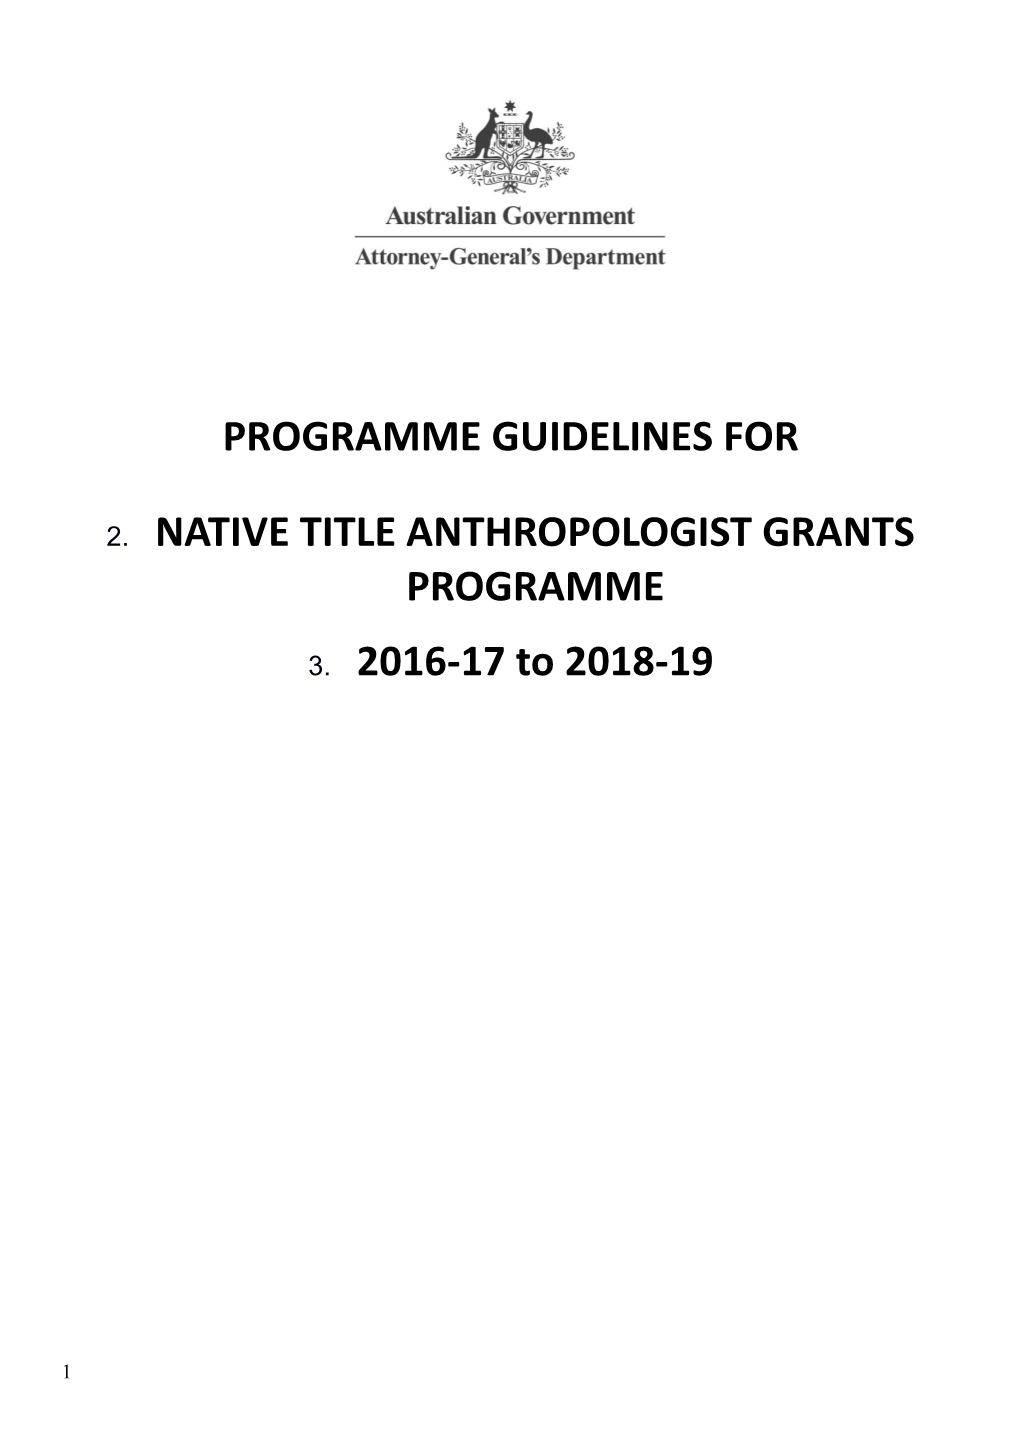 Native Title Anthropologist Grants Guidelines